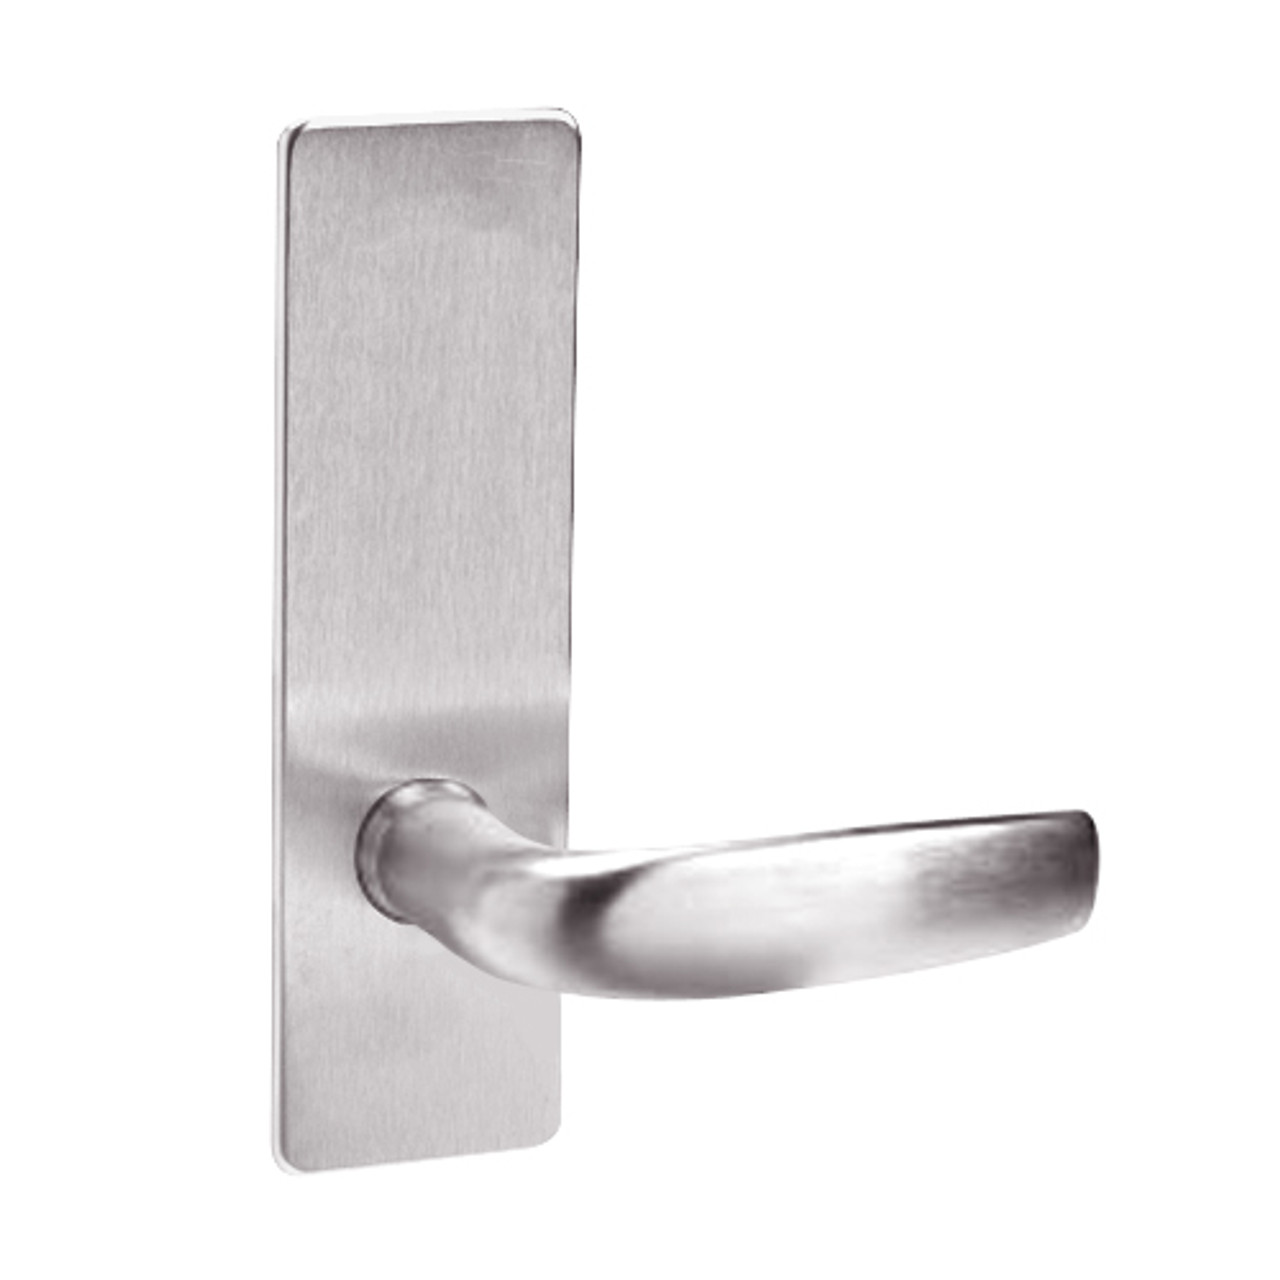 ML2020-CSN-629-M31 Corbin Russwin ML2000 Series Mortise Privacy Locksets with Citation Lever in Bright Stainless Steel